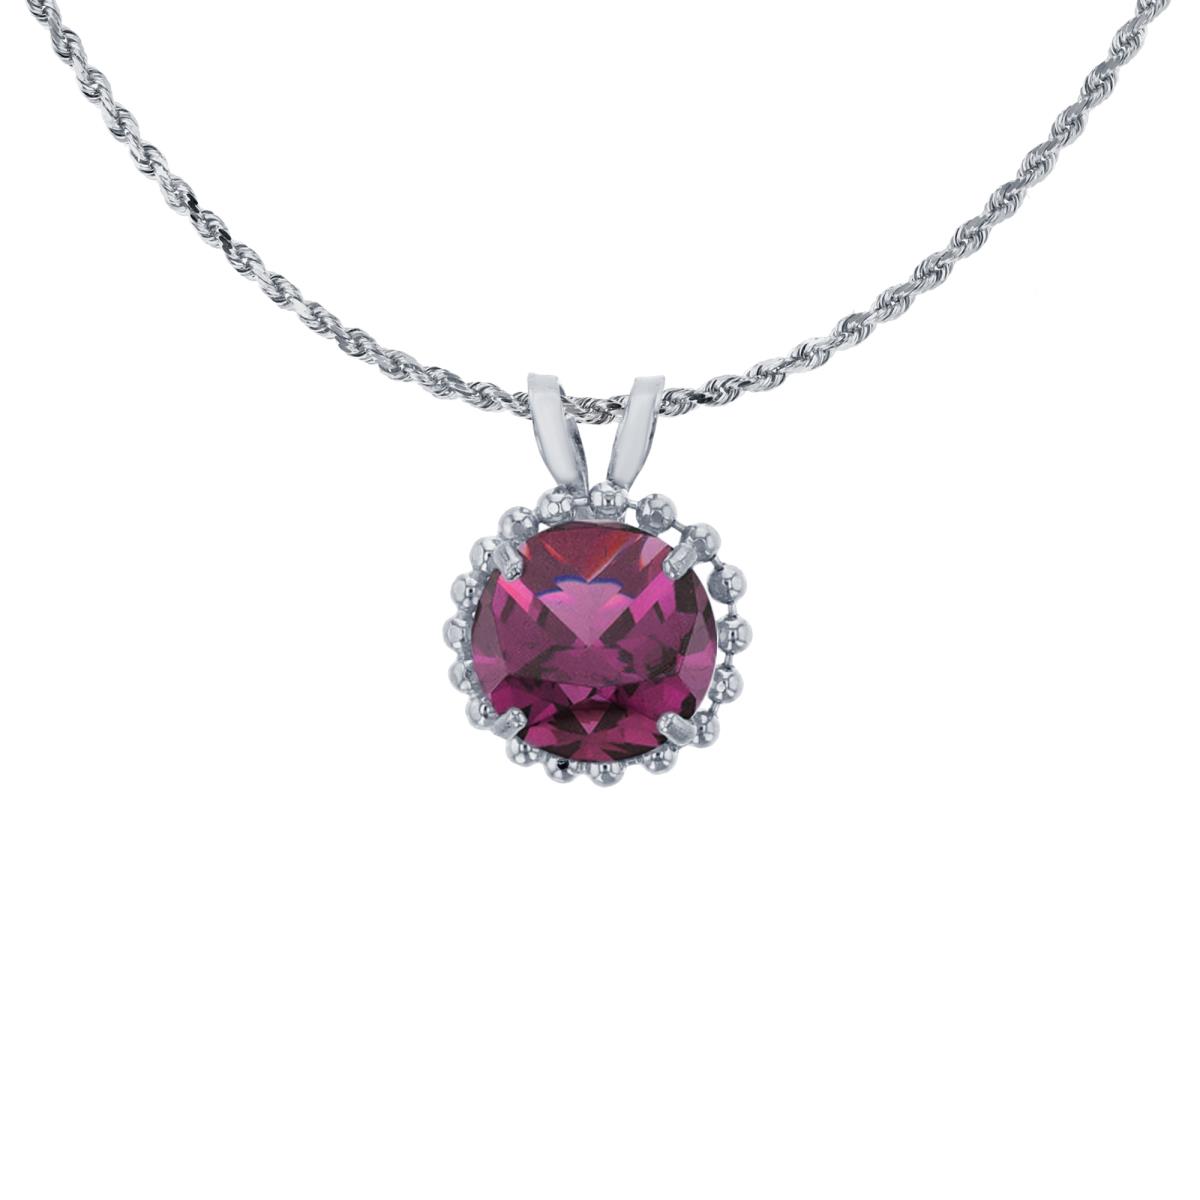 10K White Gold 6mm Rd Cut Rhodolite with Bead Frame Rabbit Ear 18" Necklace